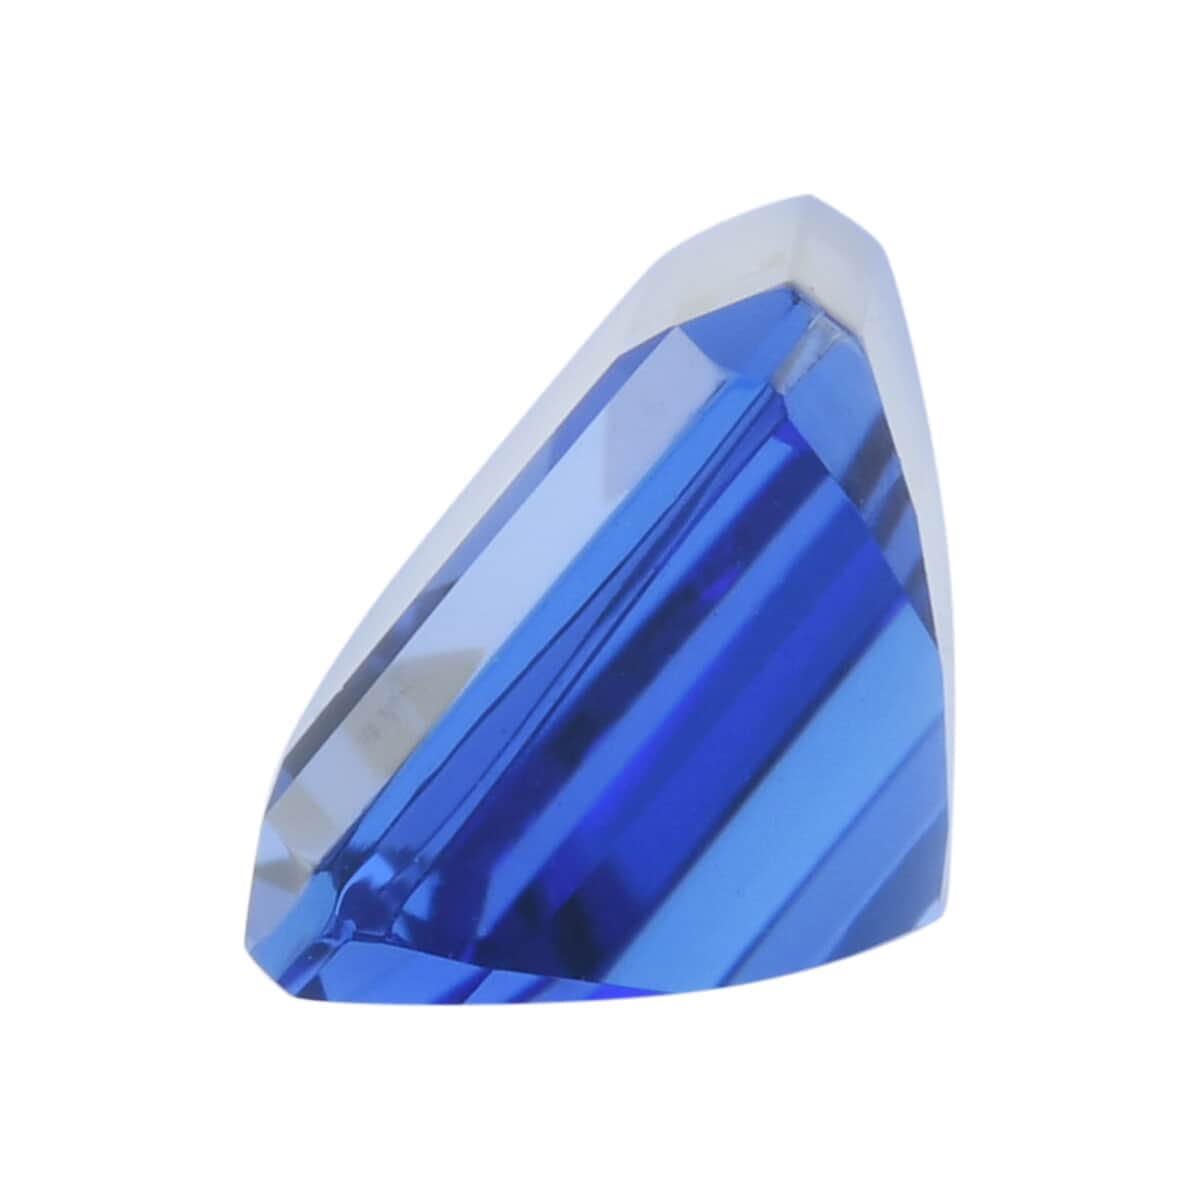 Certified & Appraised AAAA Vivid Tanzanite (Oct Free Size) Approx 3.00 ctw, Loose Gemstones, Gemstone For Jewelry, Jewelry Stones, Tanzanite Gemstone For Jewelry Making image number 1